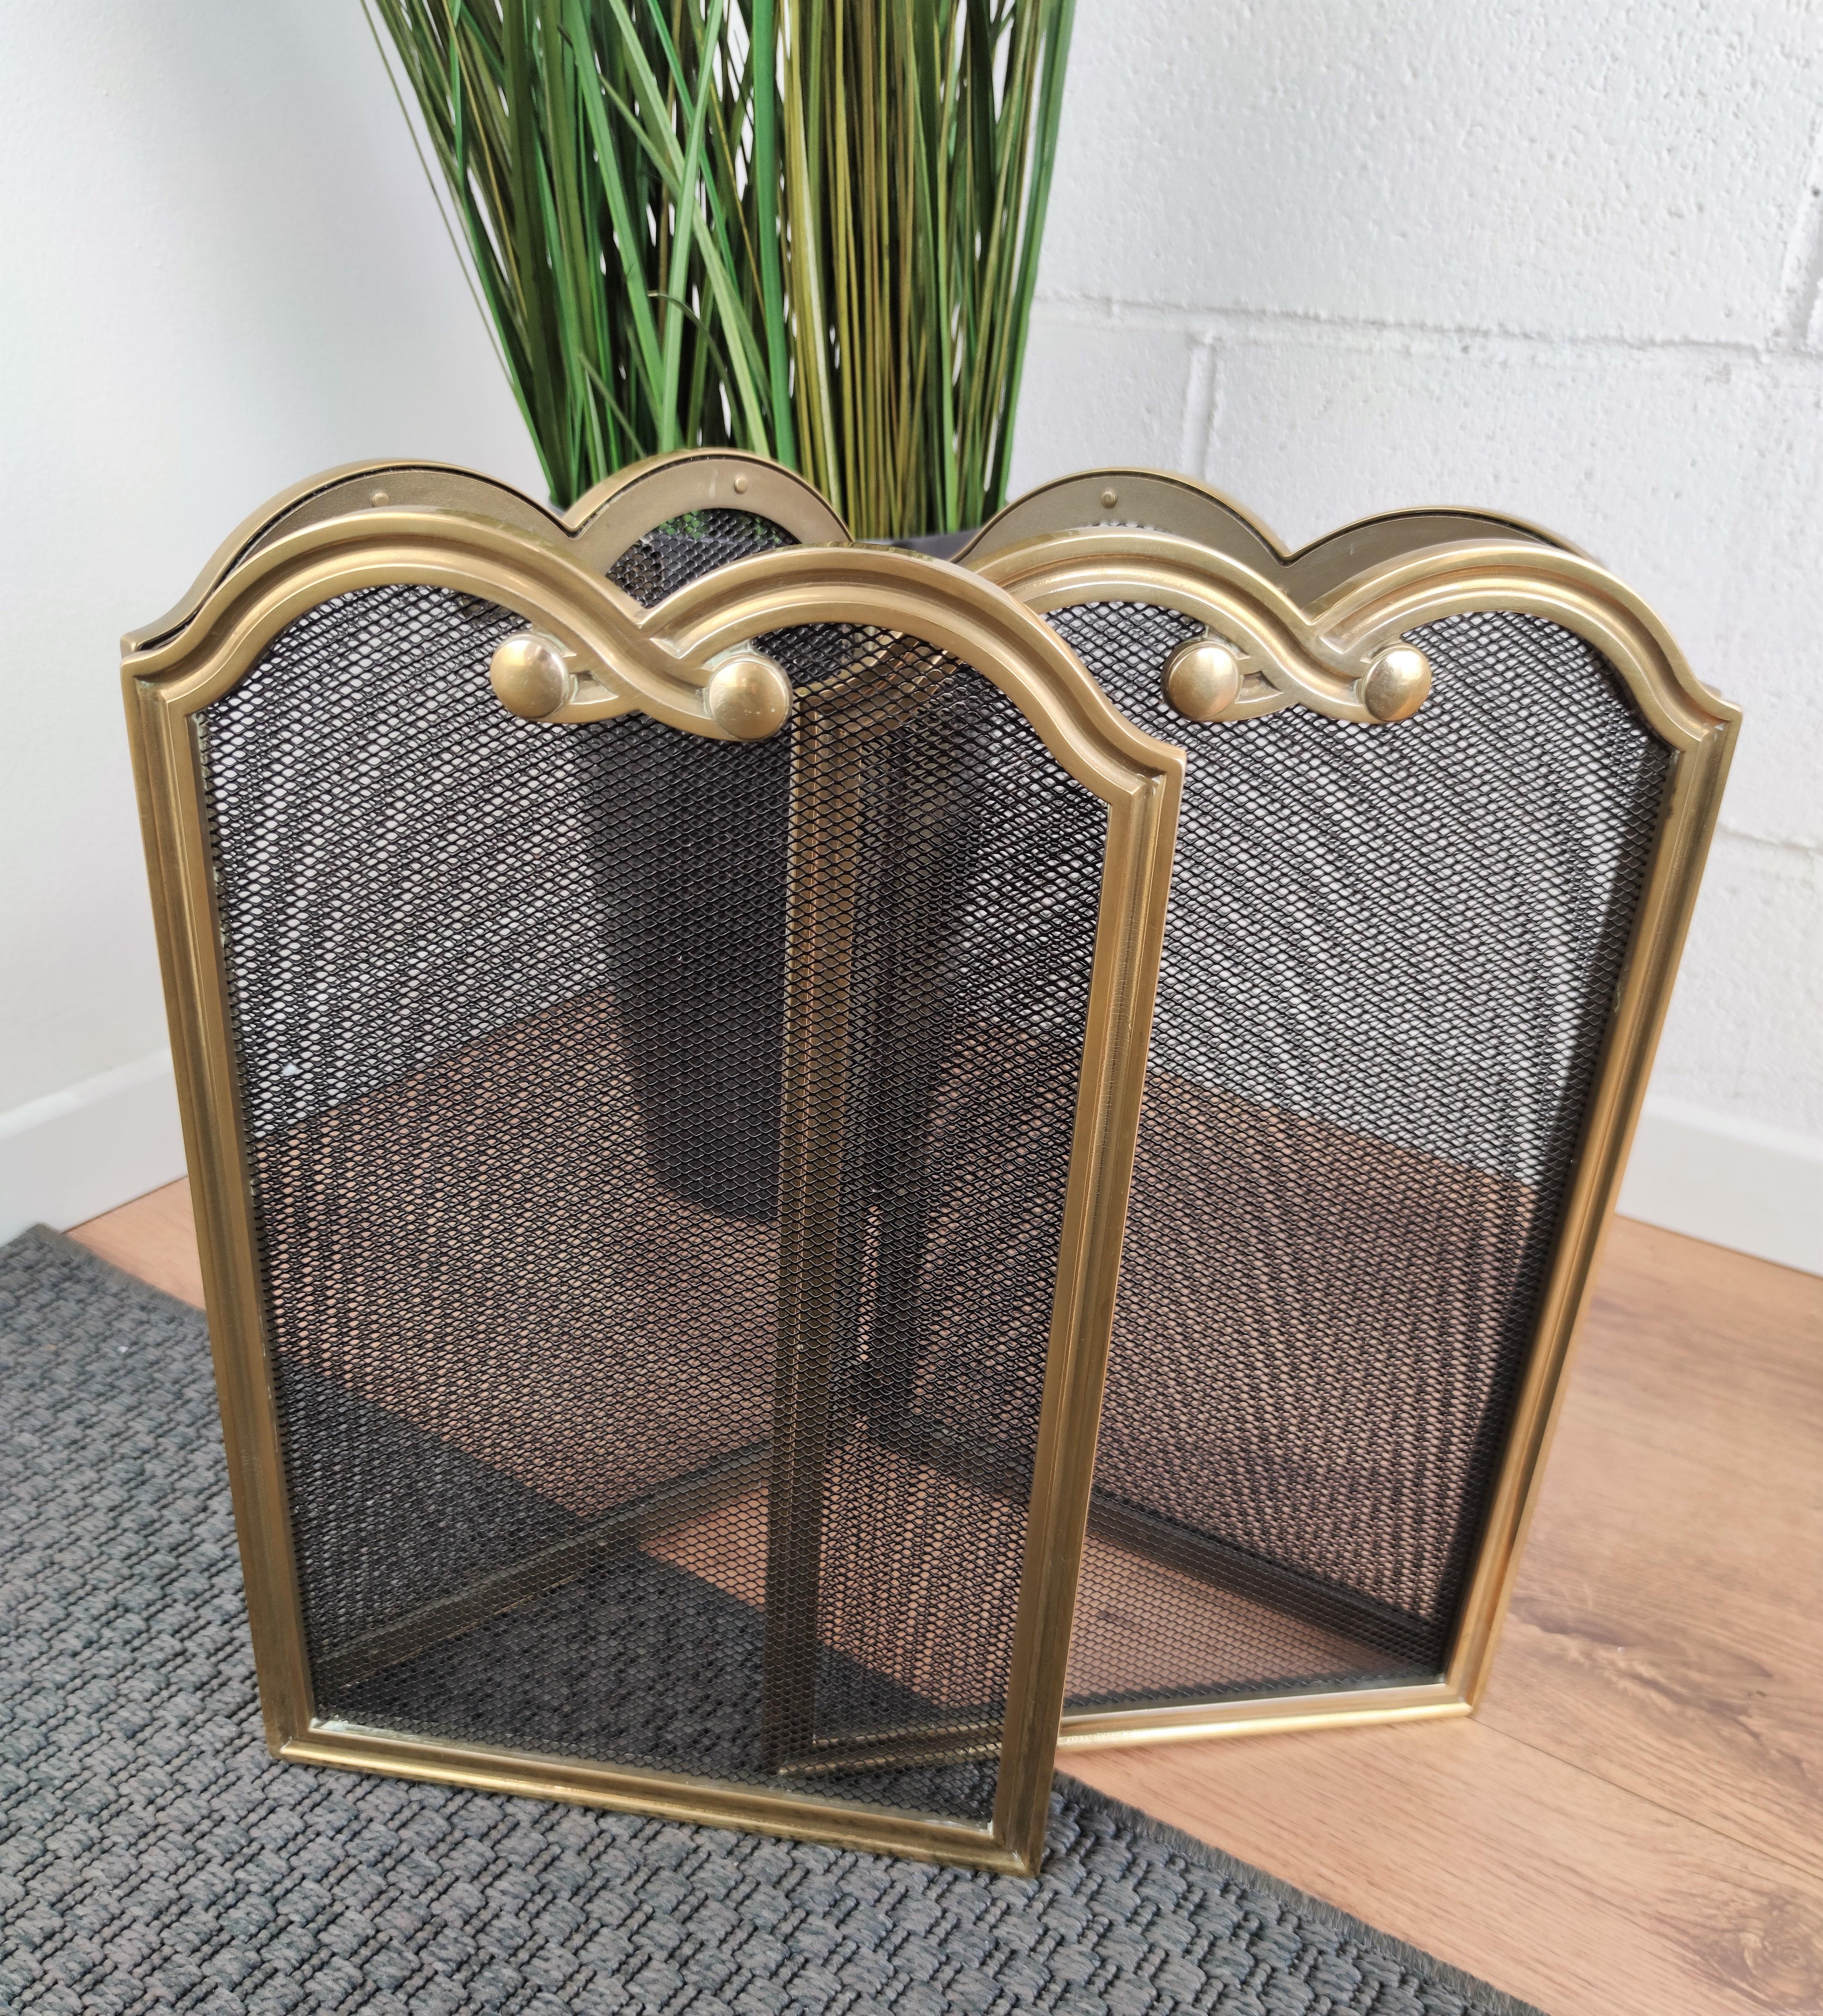 Italian gilt brass foldable fireplace screen or fire screen. Nice decorative piece, this 4 piece screen is easy to tow and use, the pieces can be easily folded to adapt and work with any opening. Overall very decorative piece in nice condition.
 